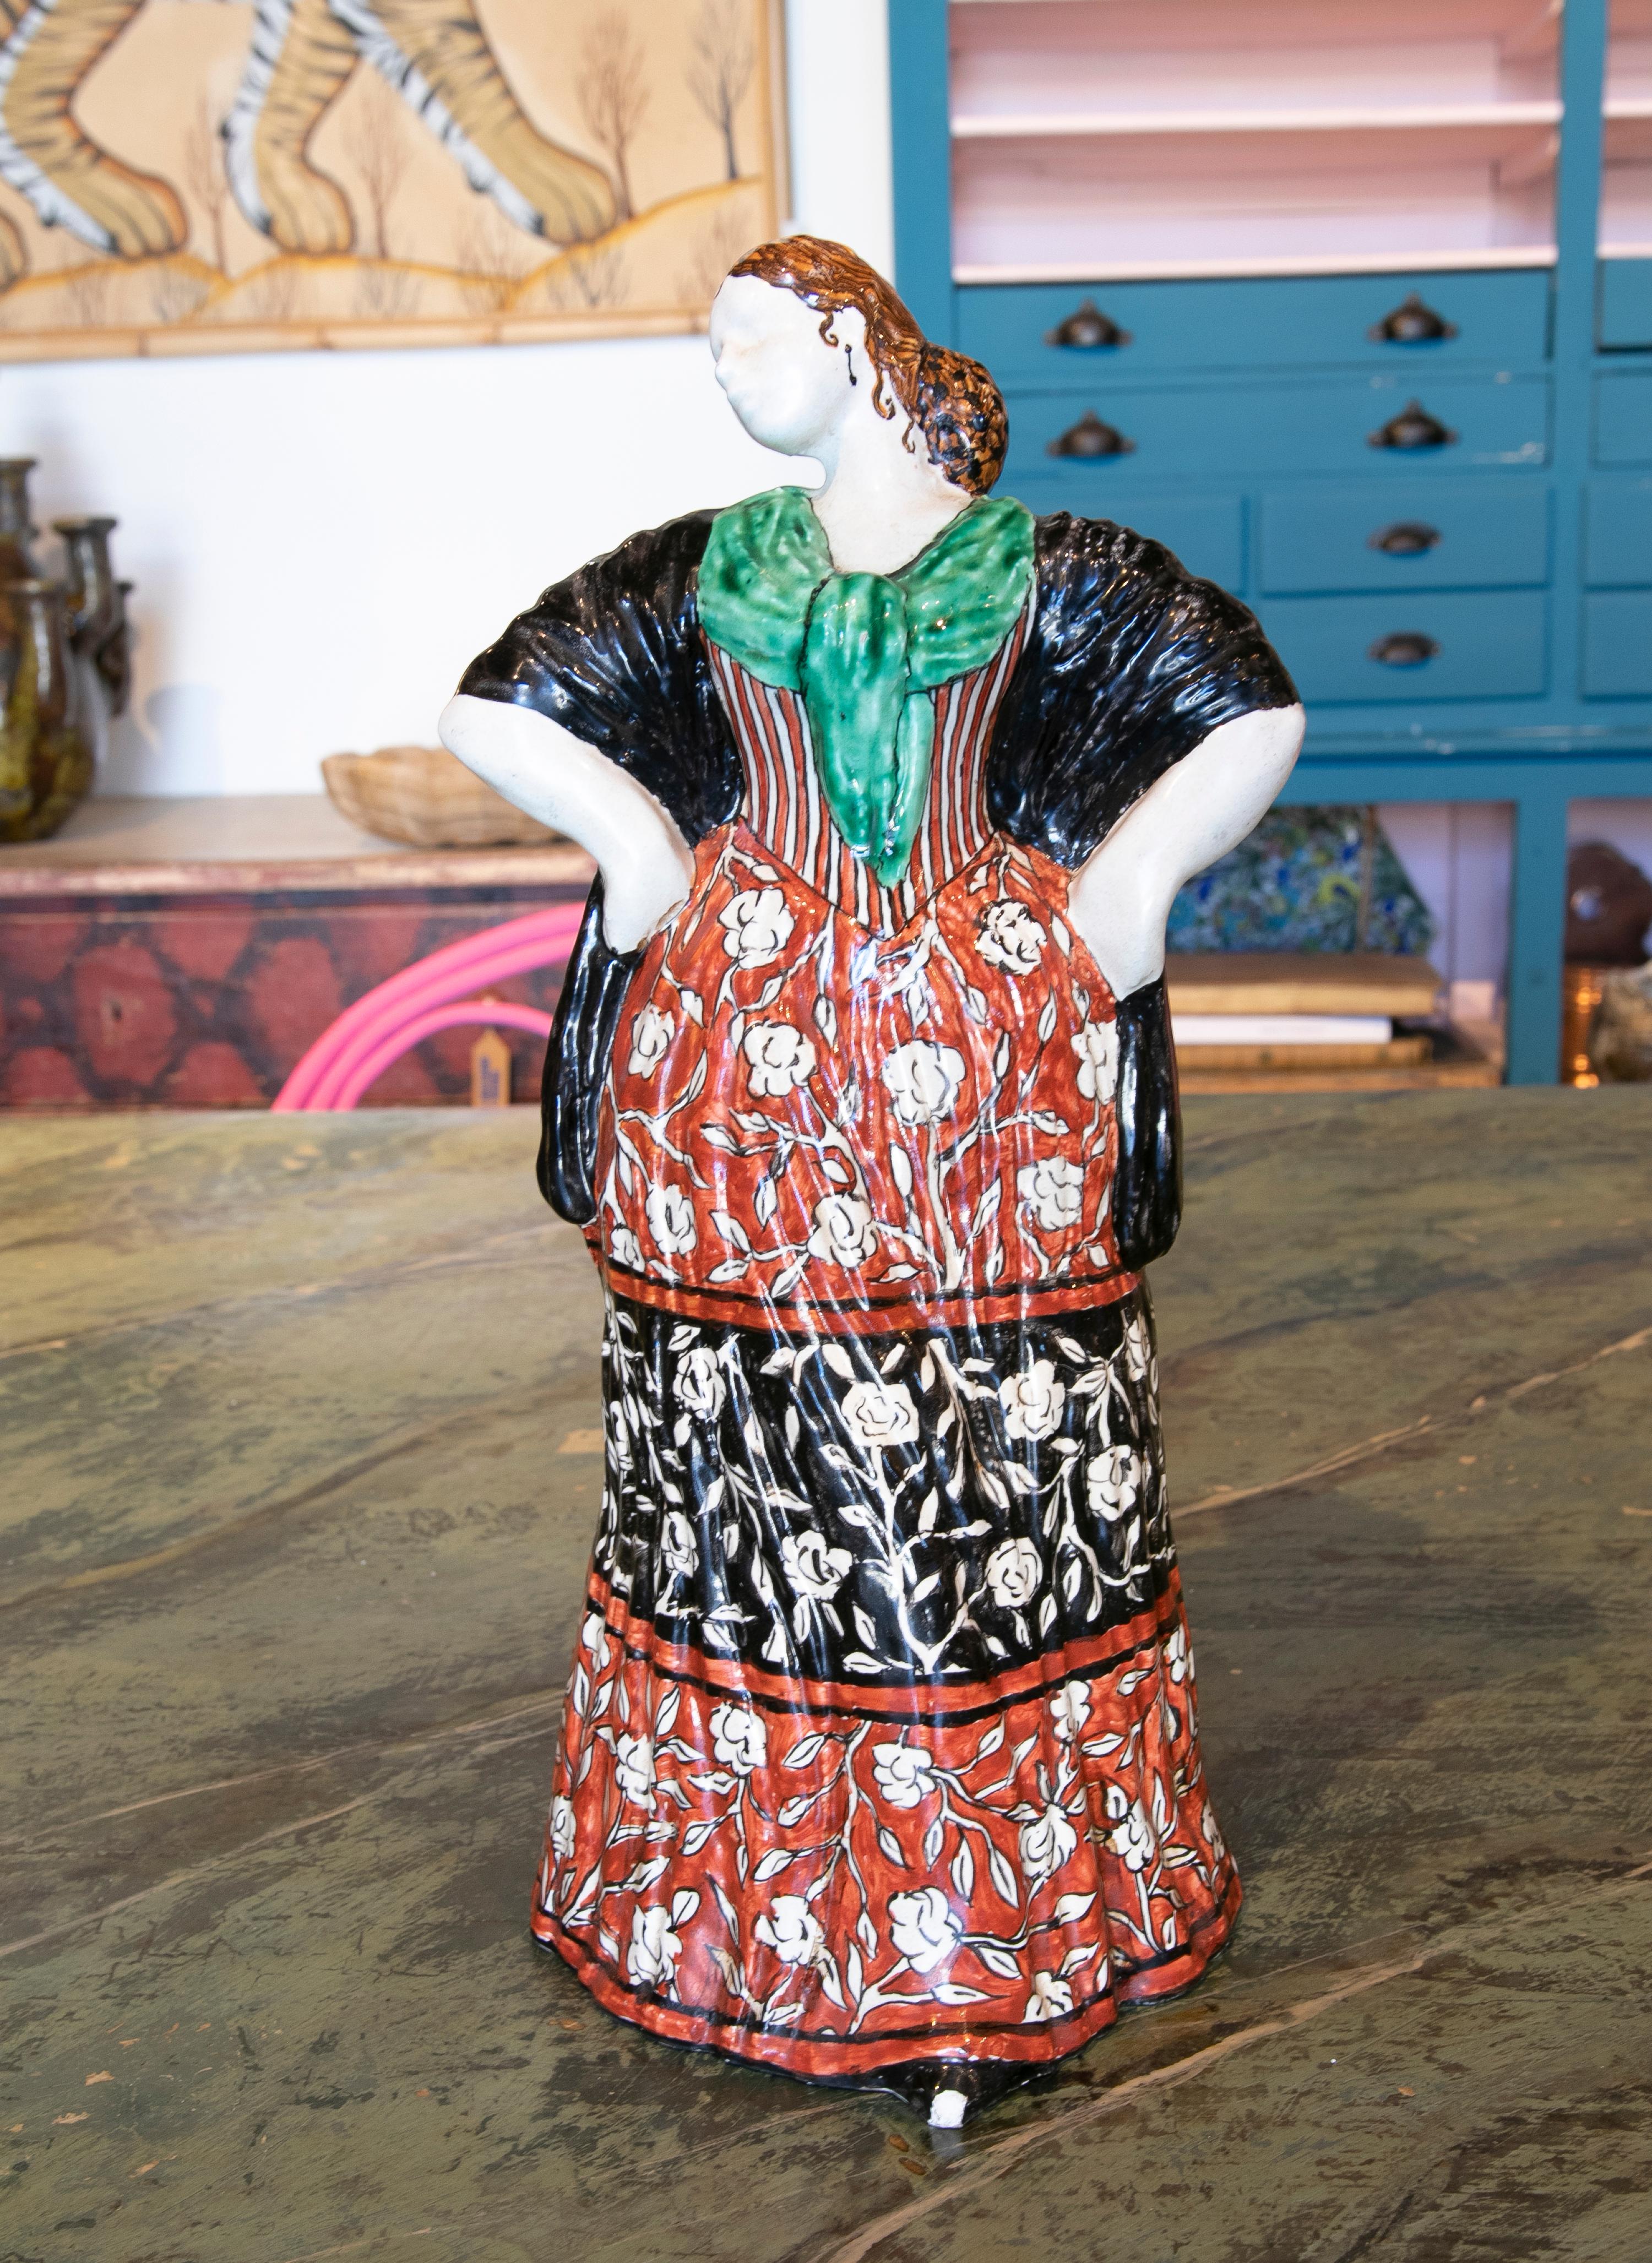 1970s handpainted glazed ceramic sculpture of a woman in typical Spanish clothing.